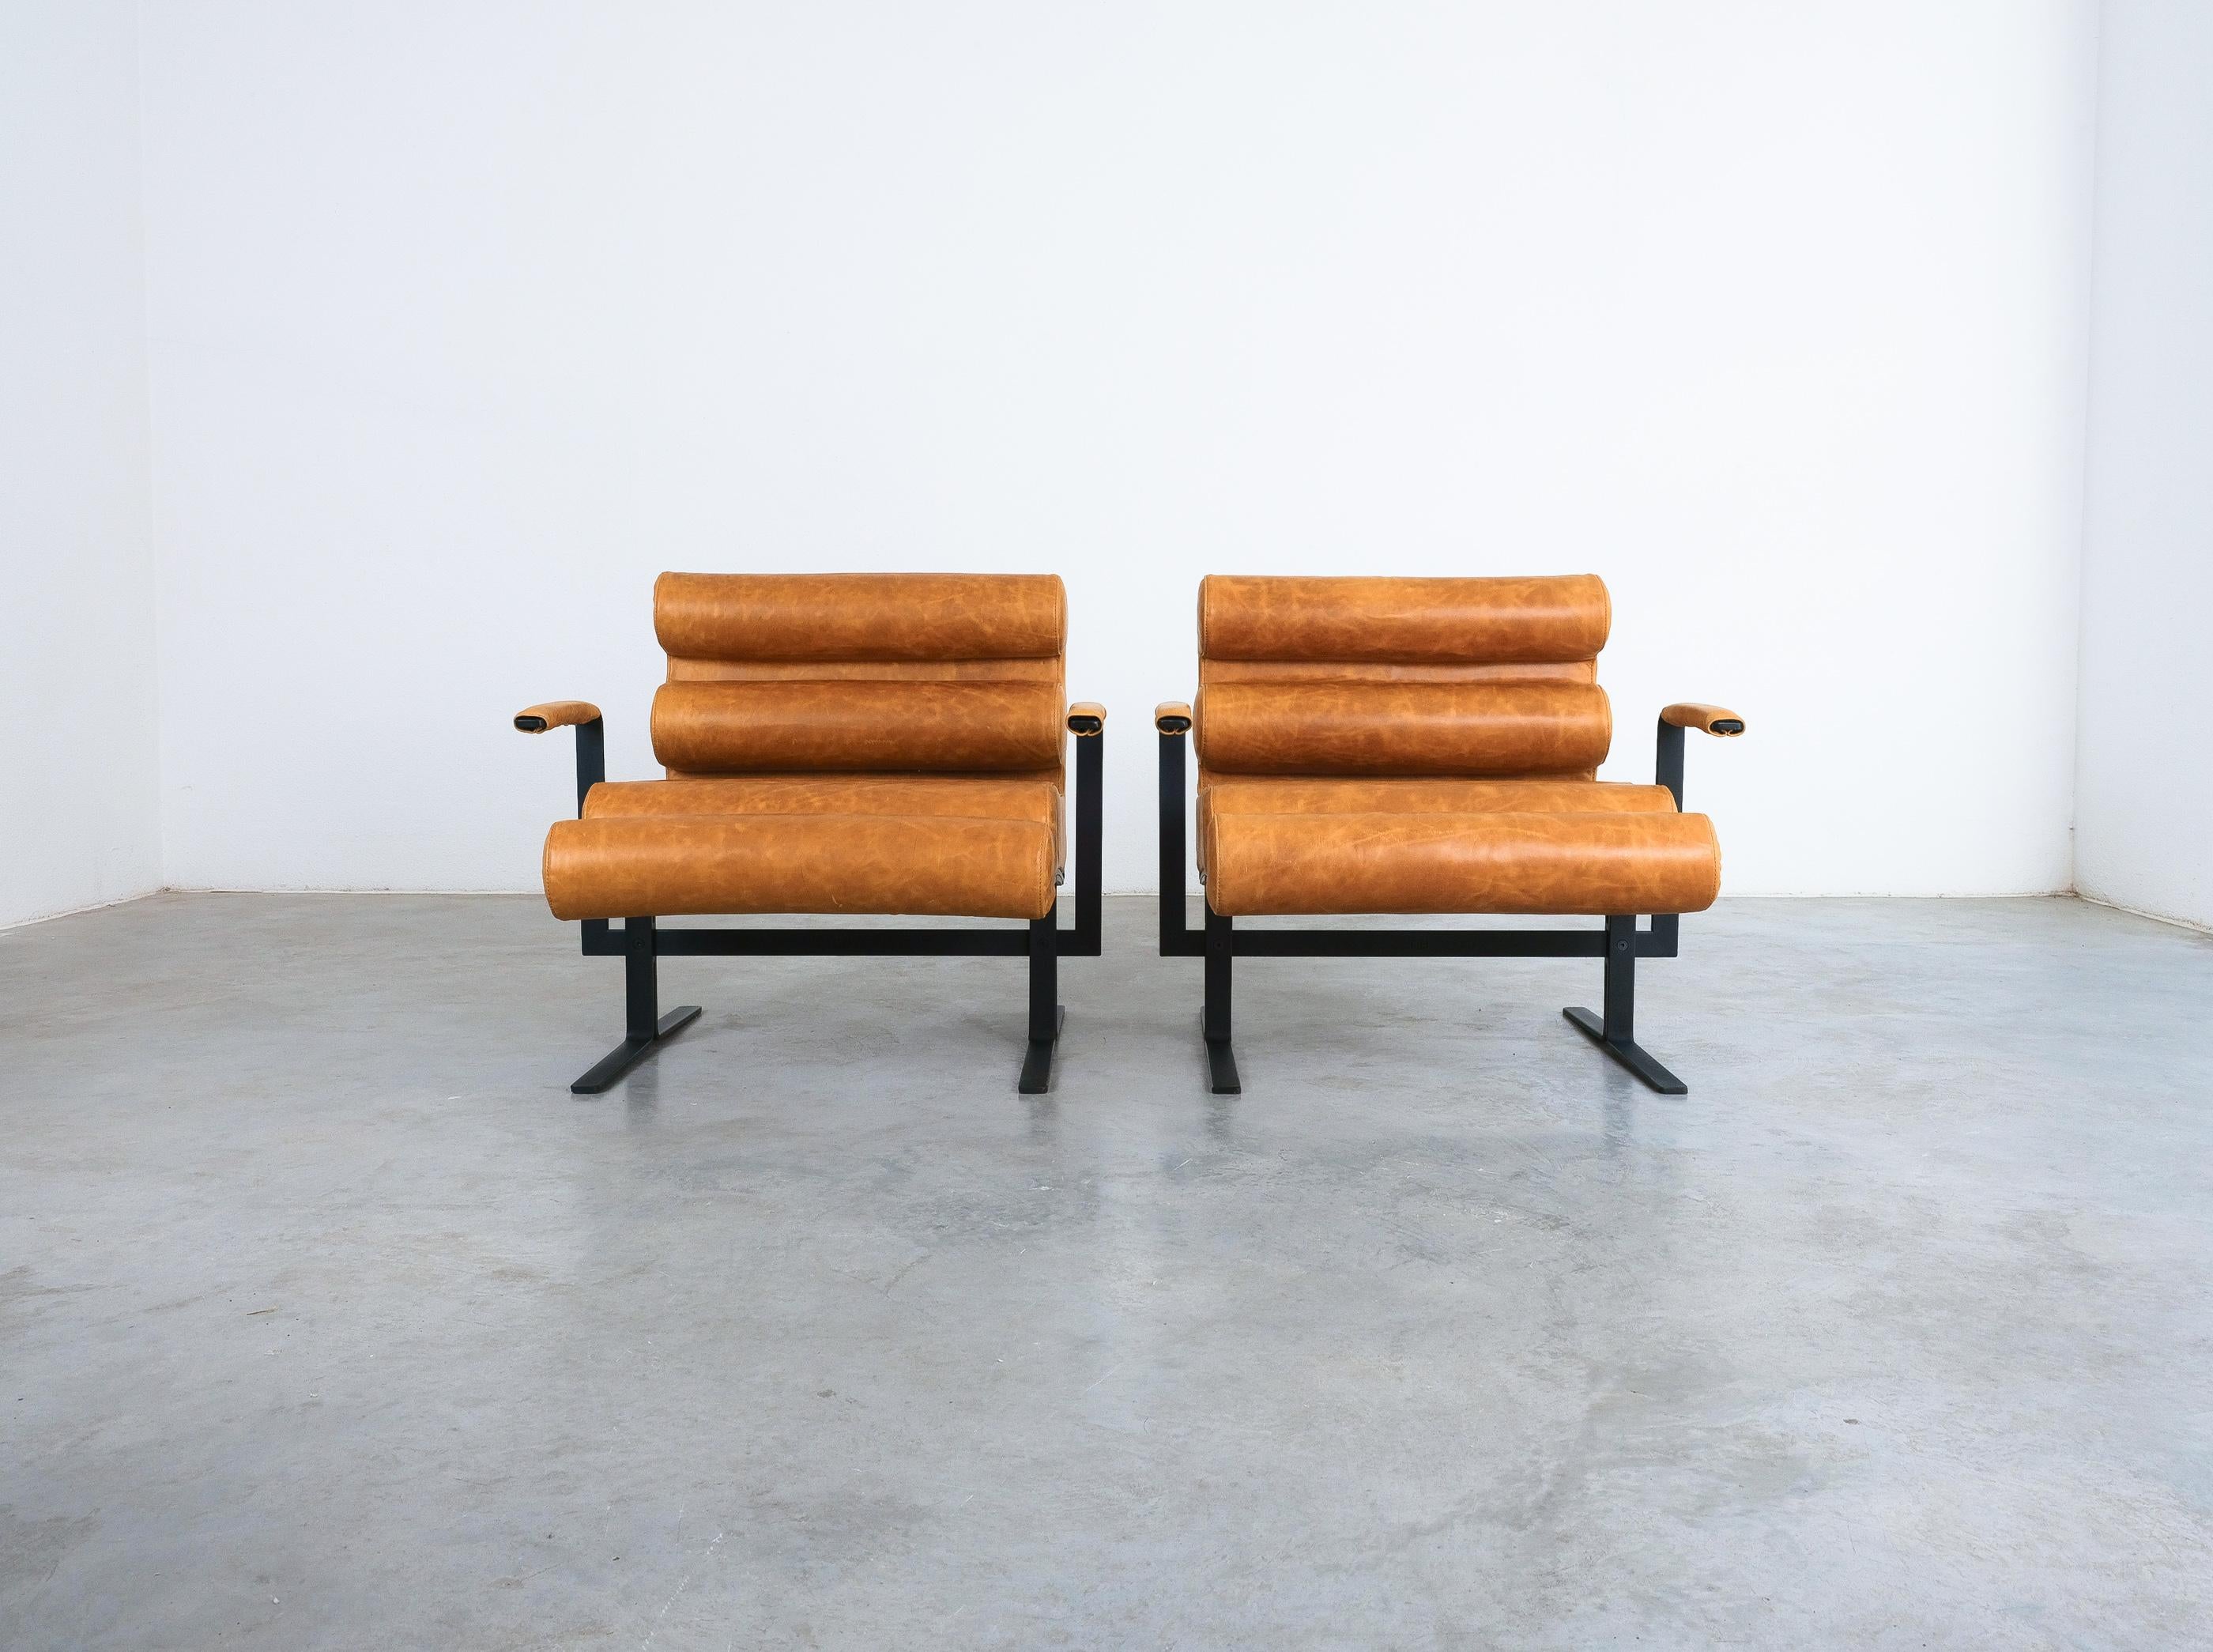 Joe Colombo For Sormani Roll Brown Leather Spring Steel Armchair Pair (2) , 1962 For Sale 11